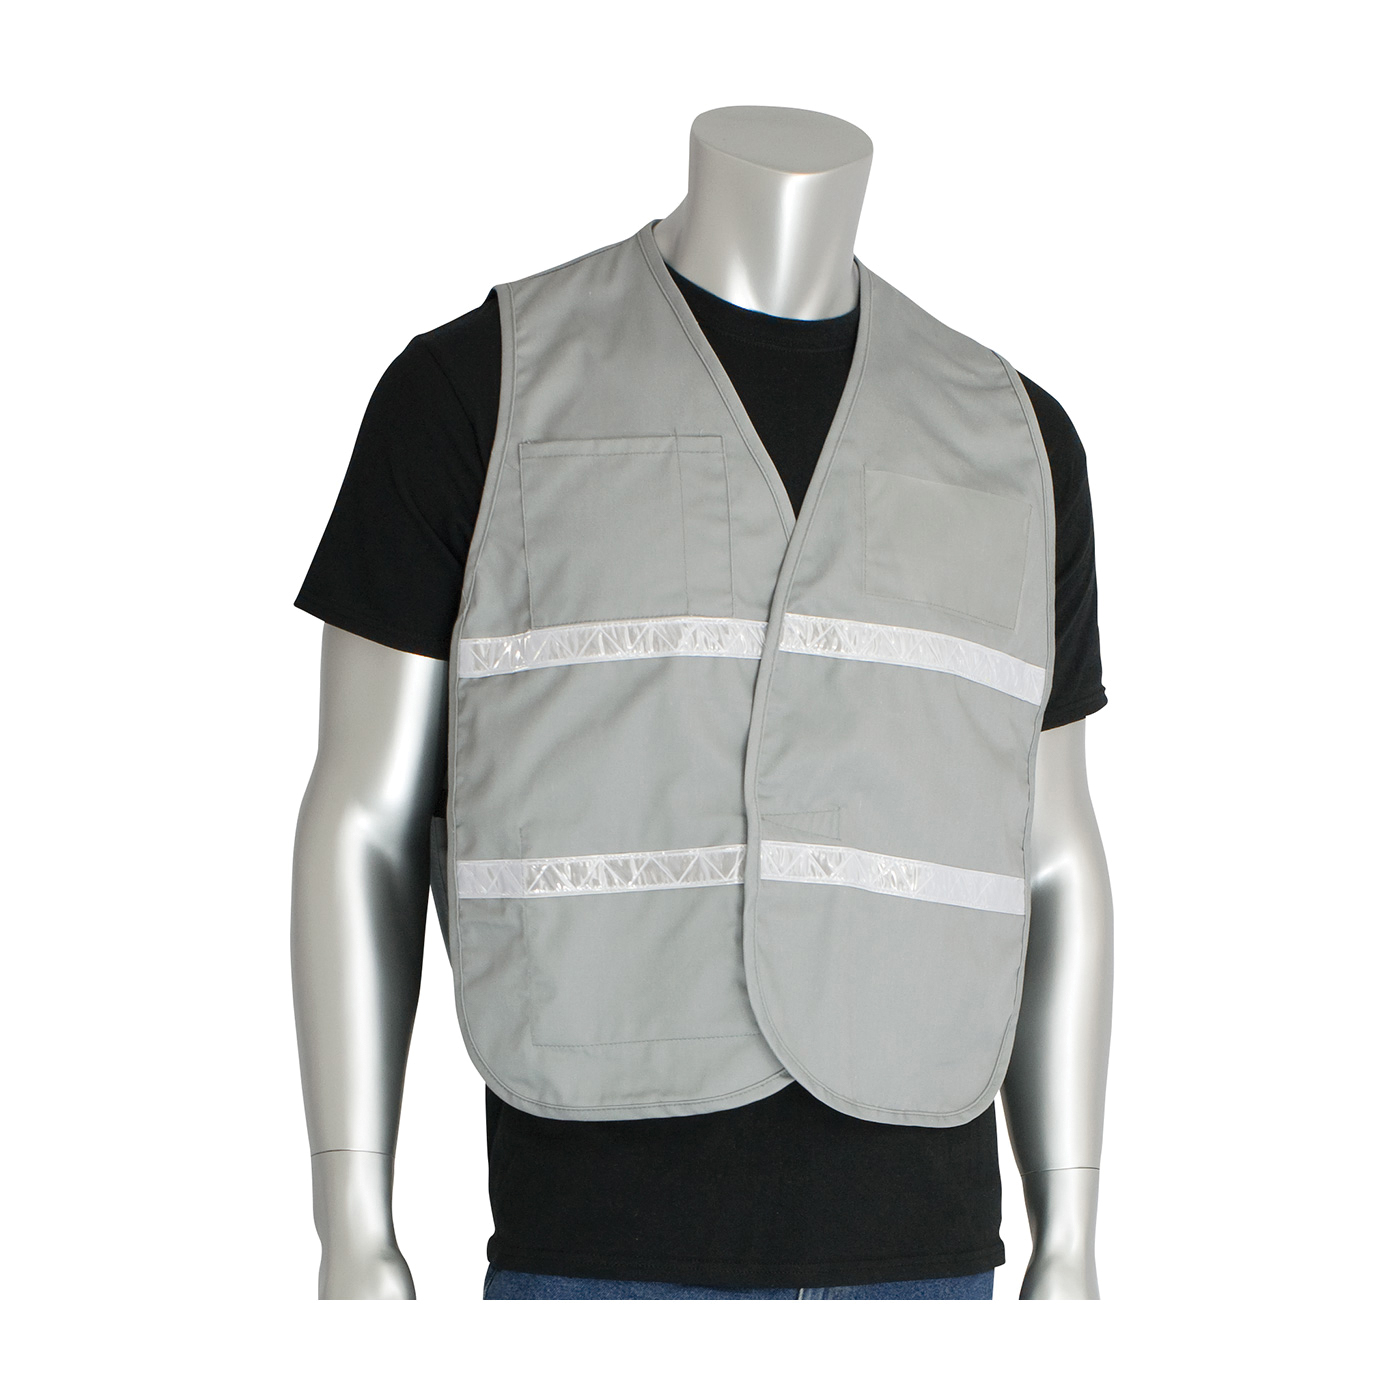 PIP® 300-2515/4X-5X 300-2500 Non-ANSI Incident Command Vest, 4XL/5XL, Gray, 35% Cotton/65% Polyester, Hook and Loop Closure, 4 Pockets